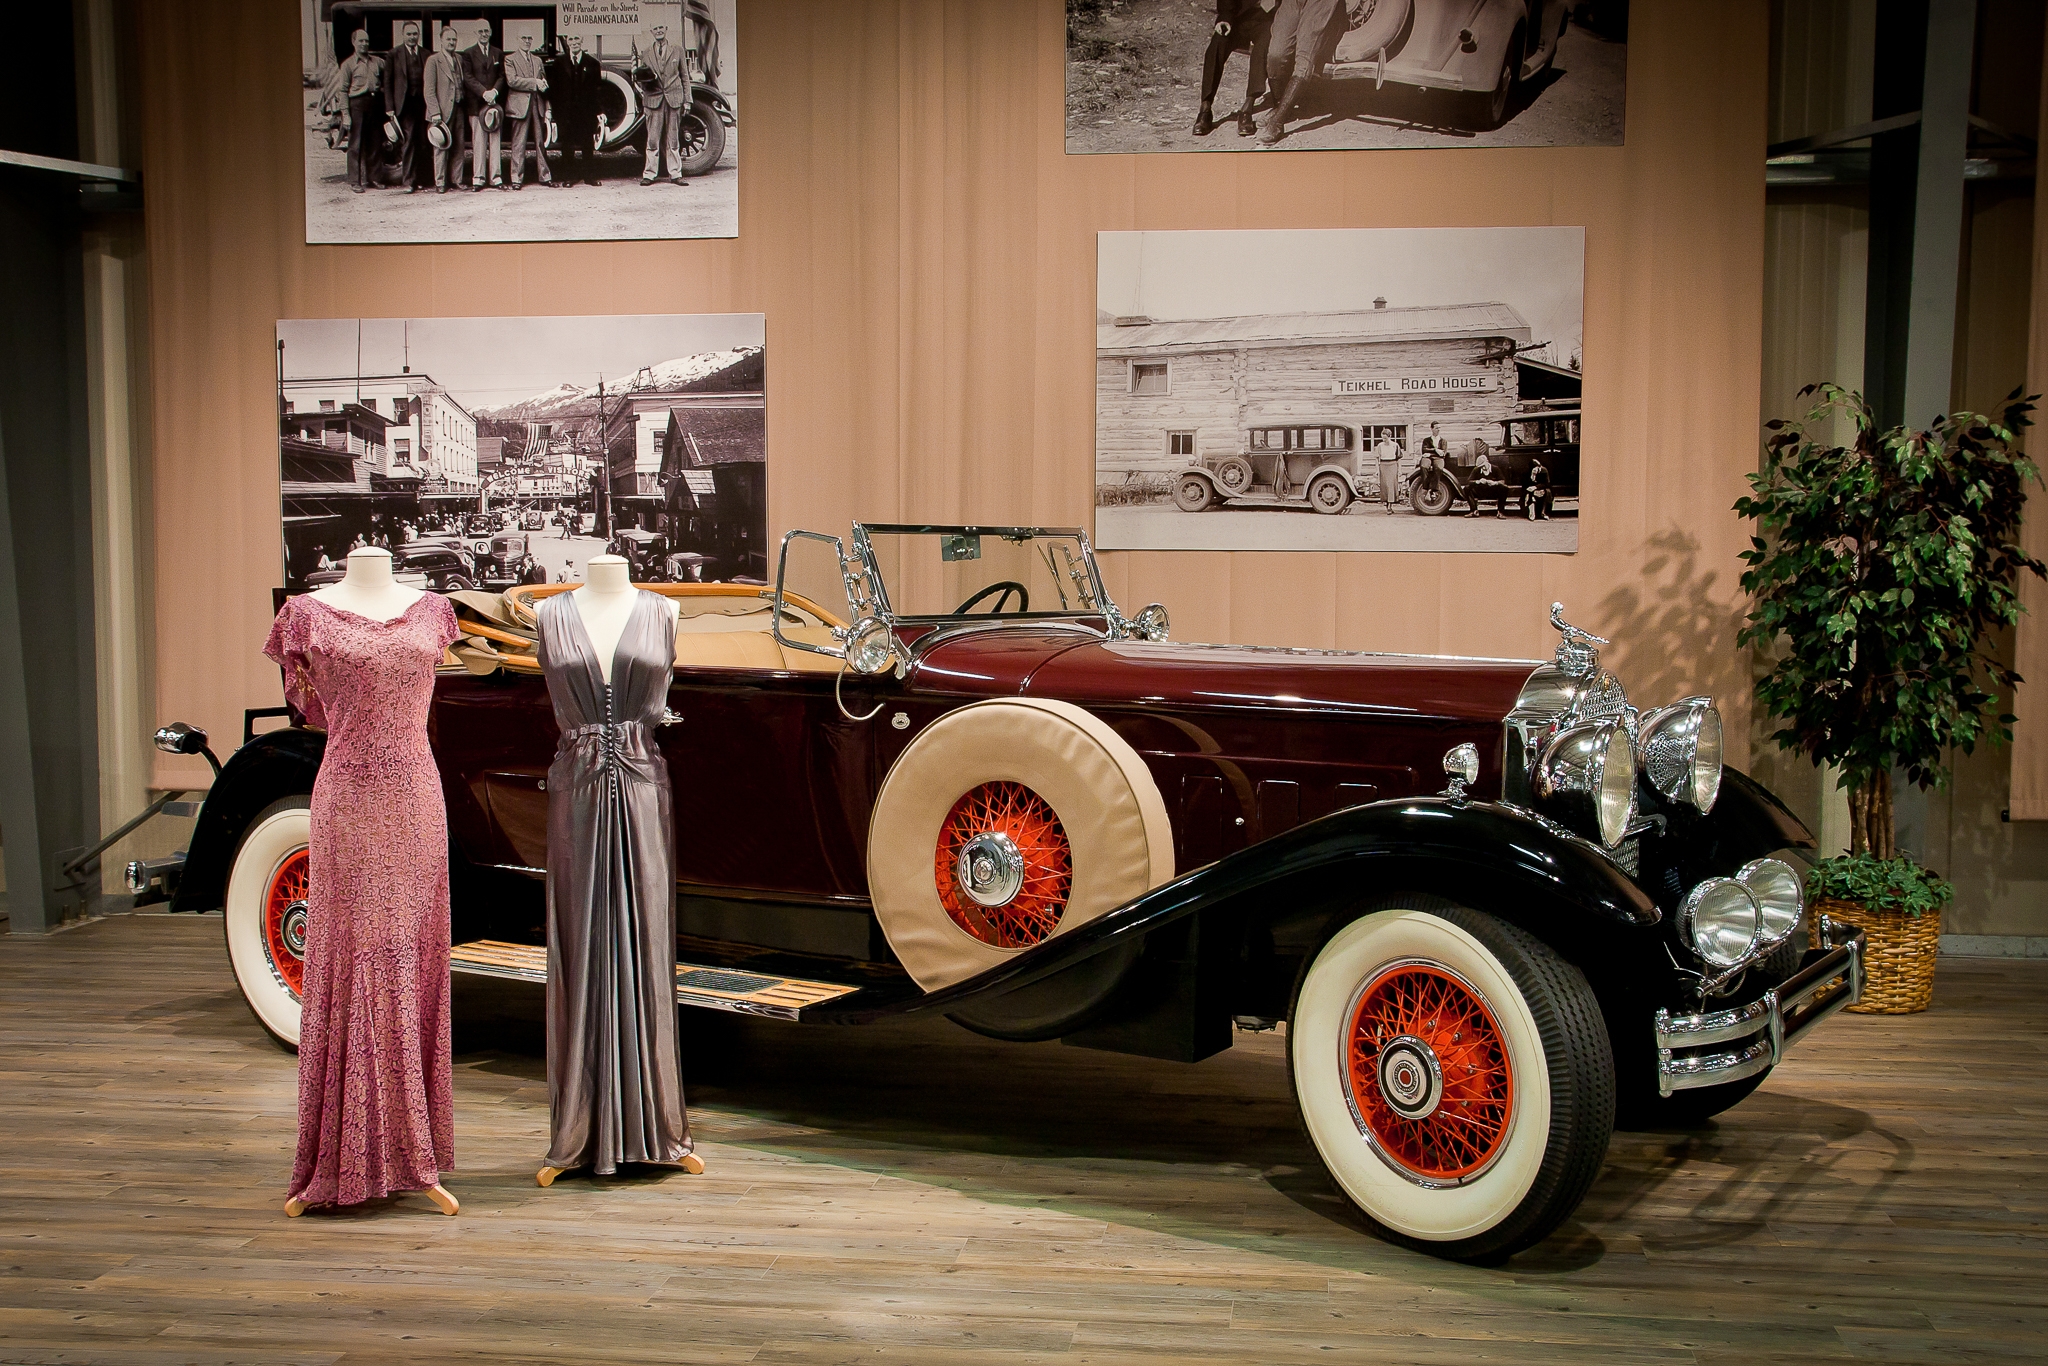 Historic clothing and automobiles on display at the Antique Auto Museum